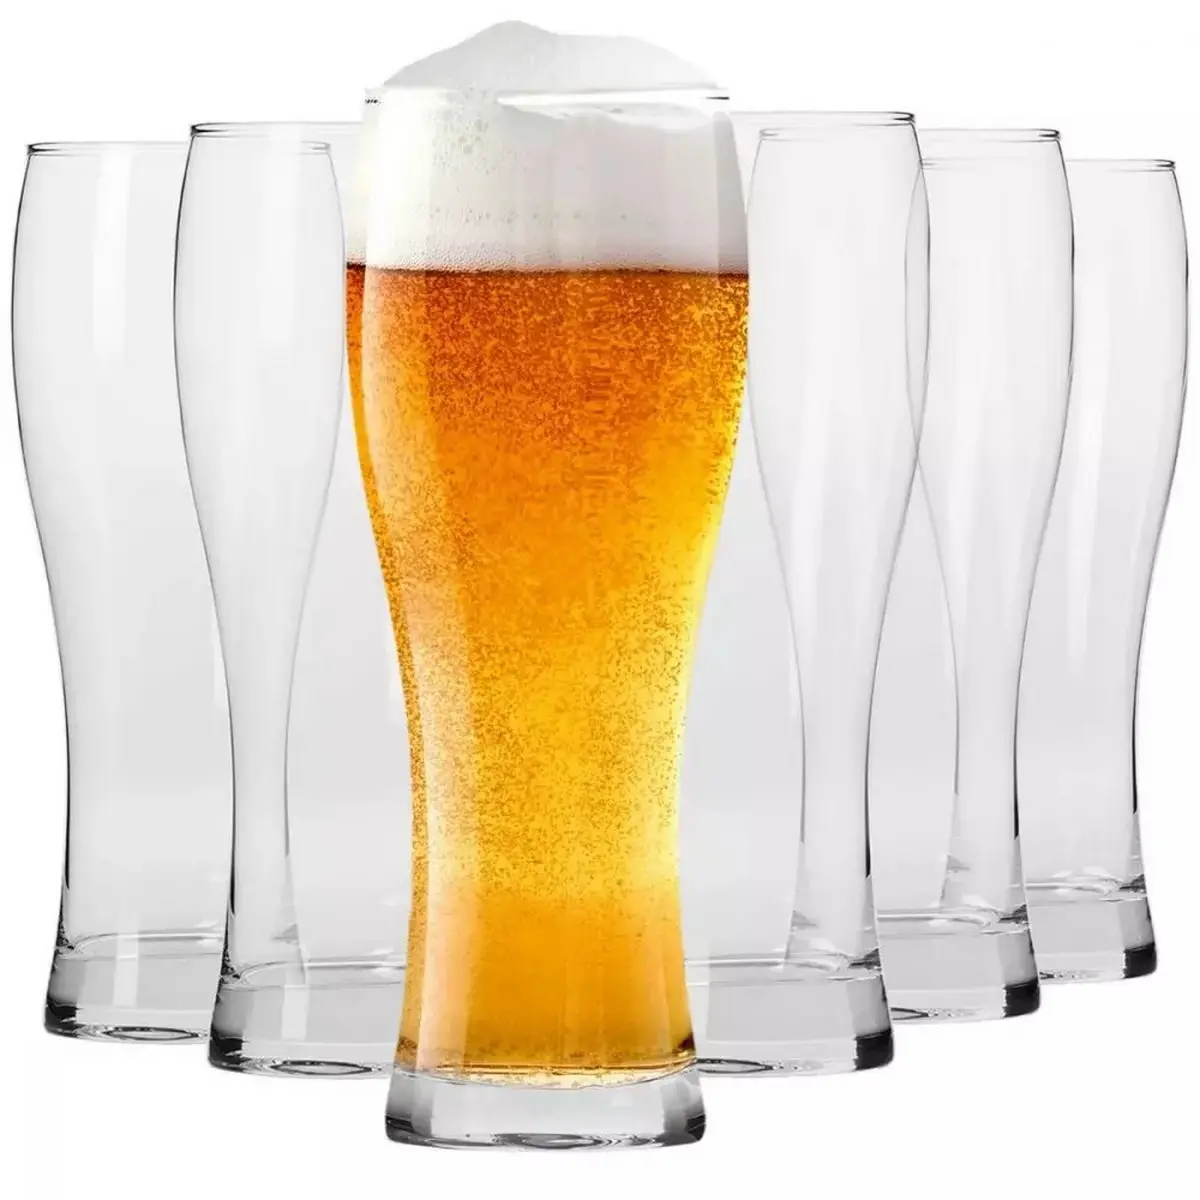 Tall Classic Beer Glass Set - 6-Piece Collection - 16.9 oz  500ml  Capacity - Craftsmanship - B2B Wholesale Offer - Krosno Glass